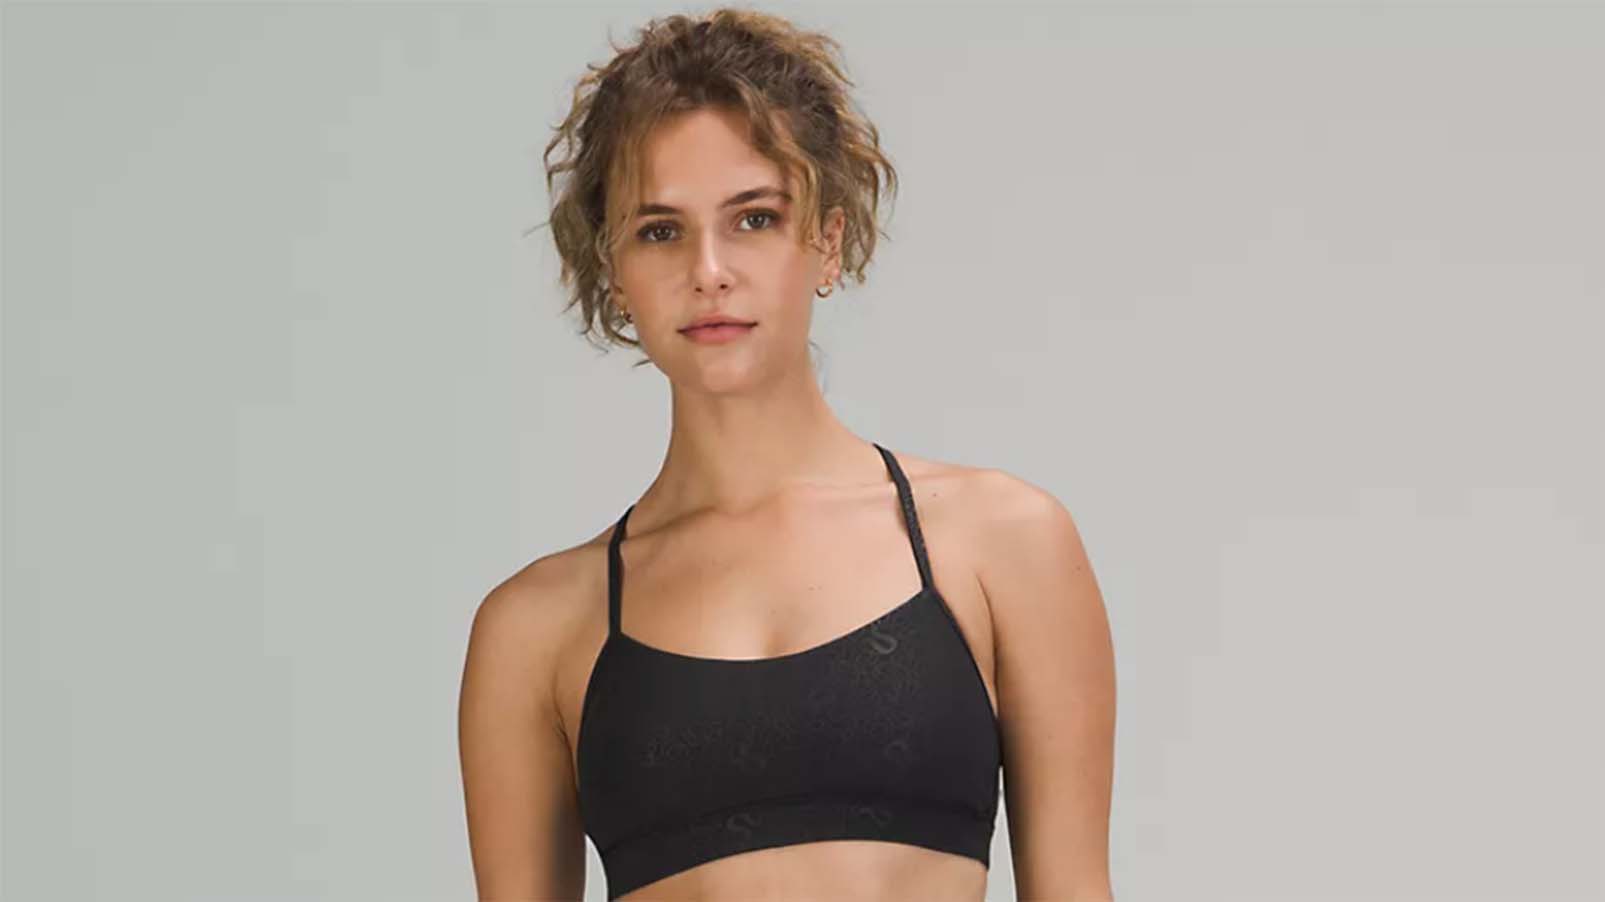 Affordable and comfortable: A review of the Lunaire Coolmax sportsbra